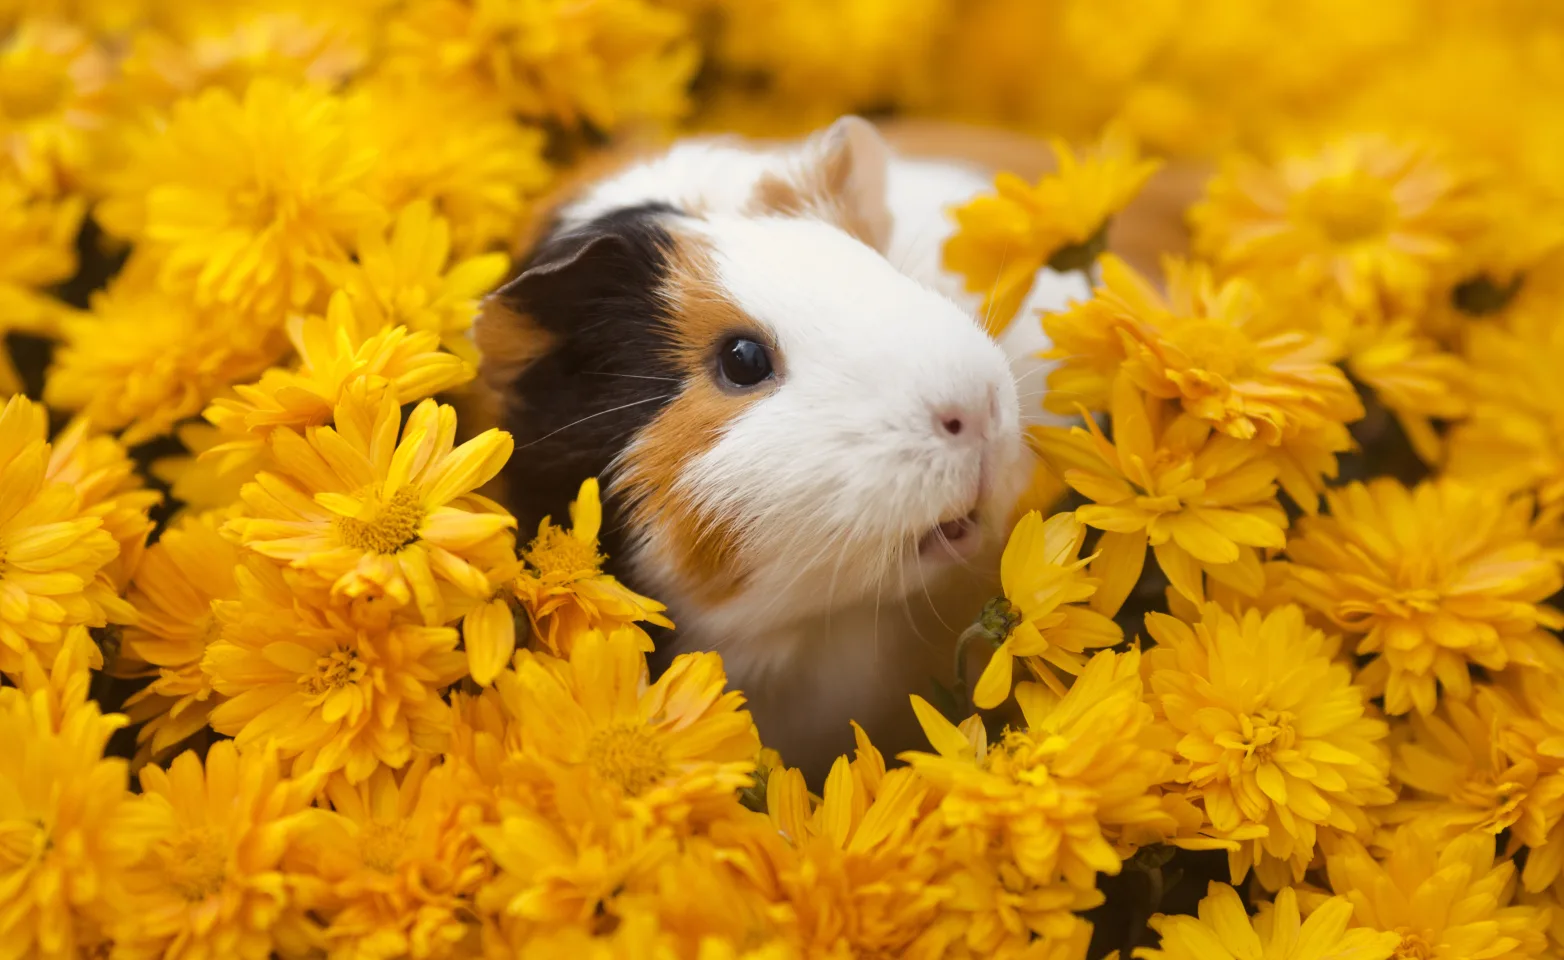  Guinea Pig in yellow flowers.